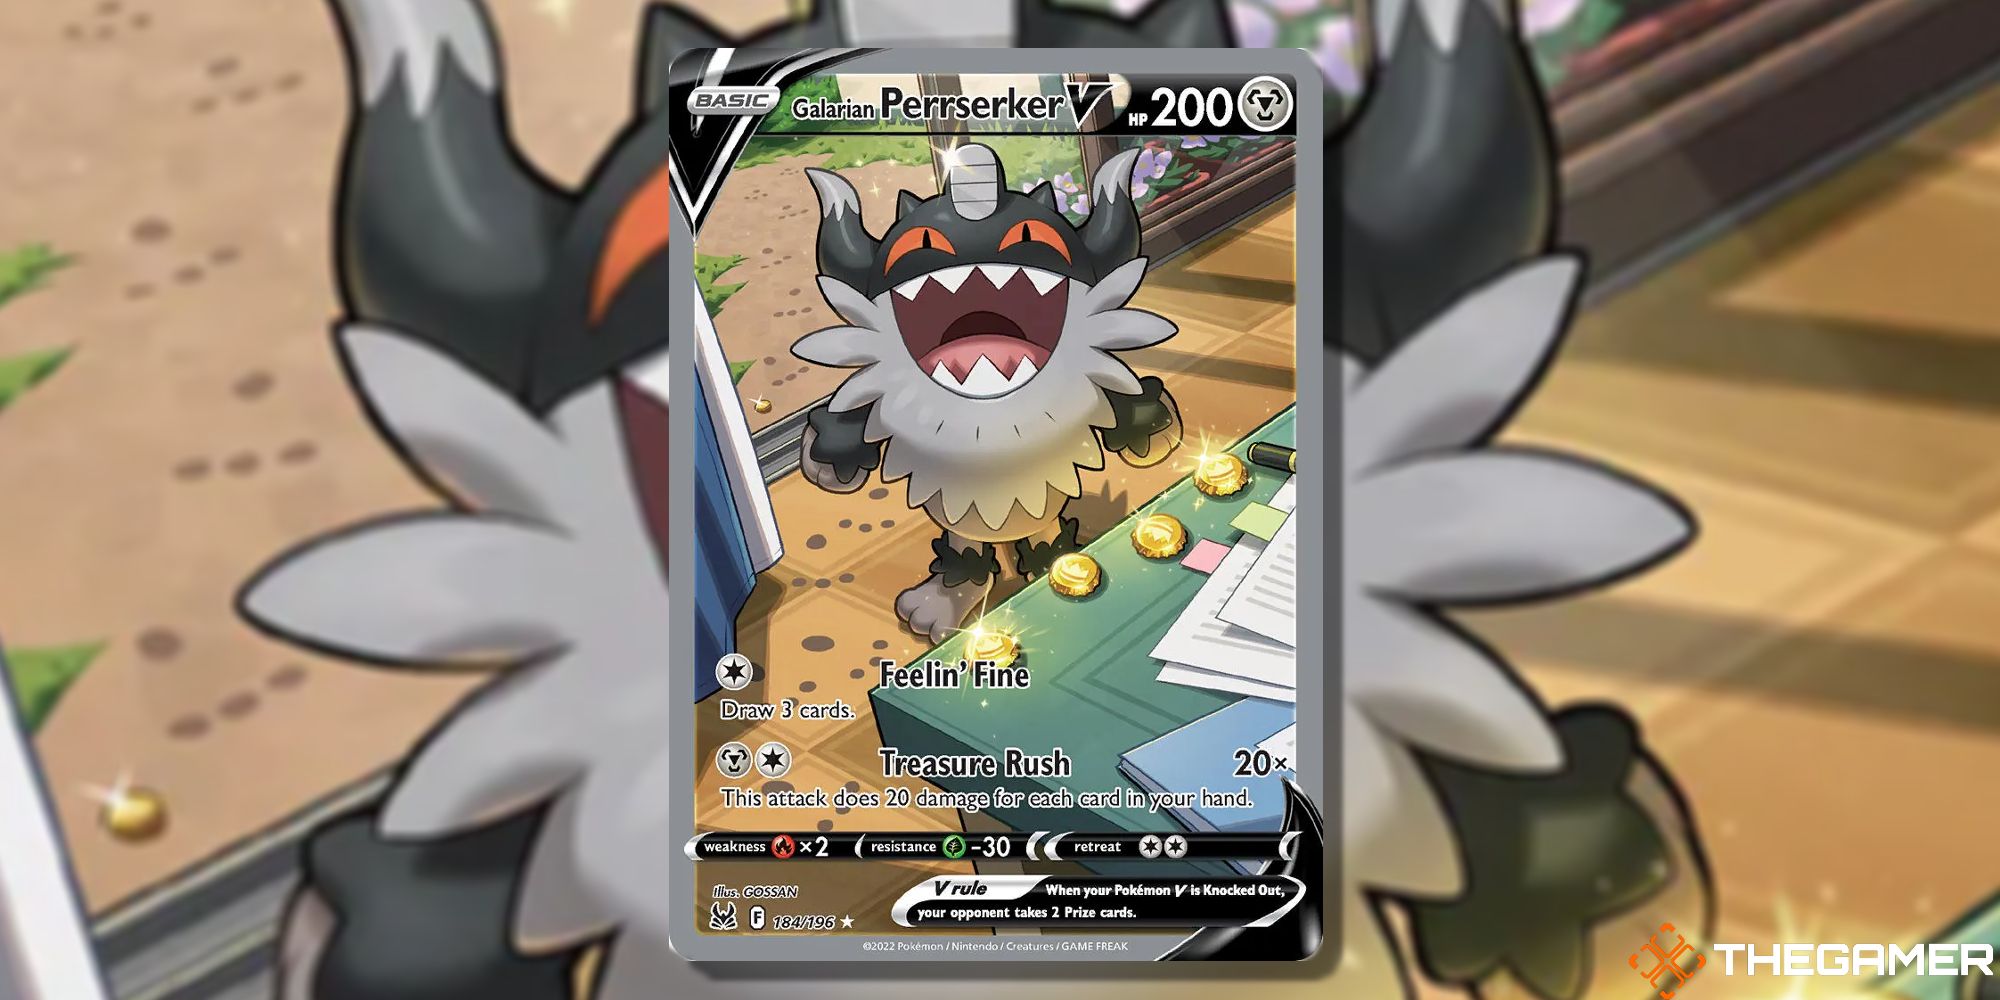 Image of the card Purrserker V in Pokemon TCG, with art by GOSSAN